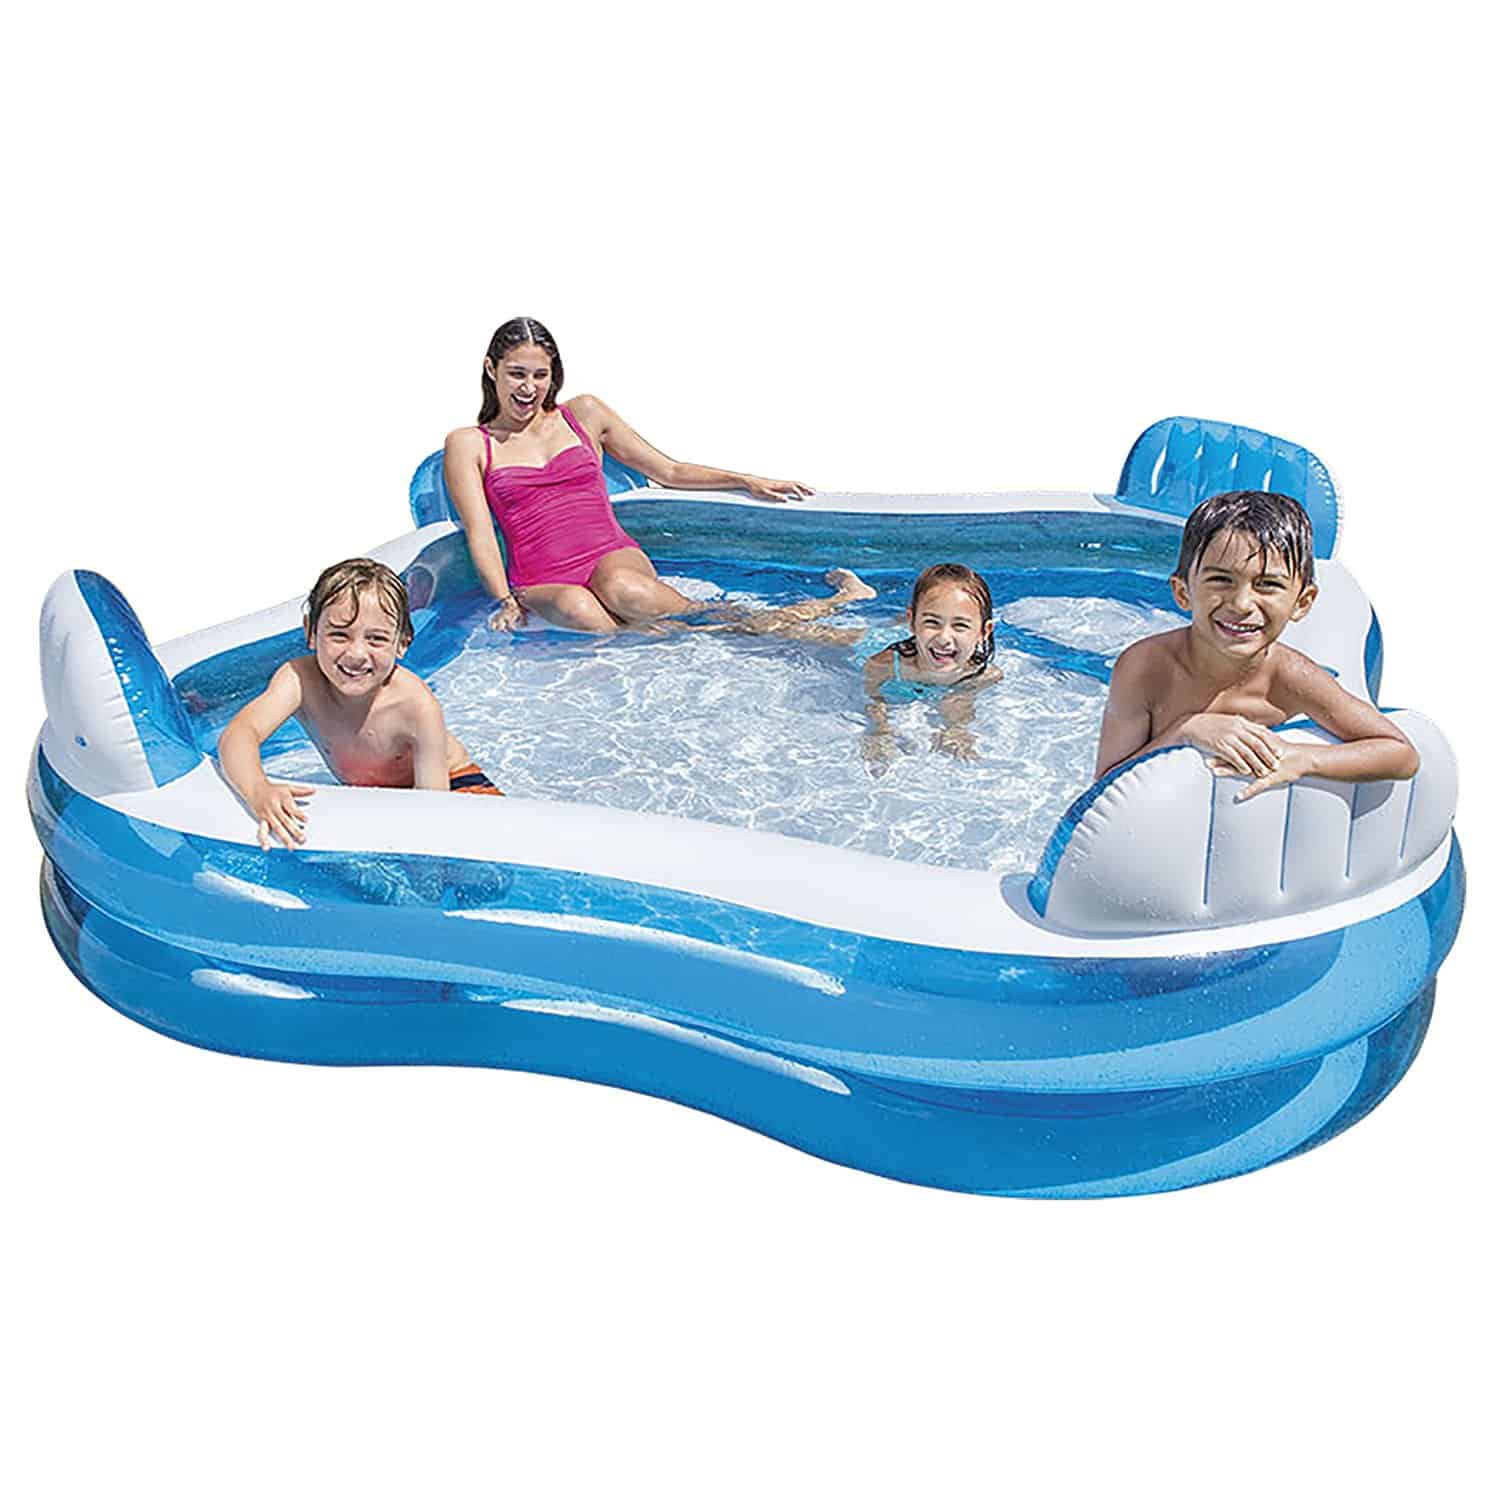 Inflatable Swimming Pool Outdoor Family Inflatable Pool Kids Paddling Pools UK 